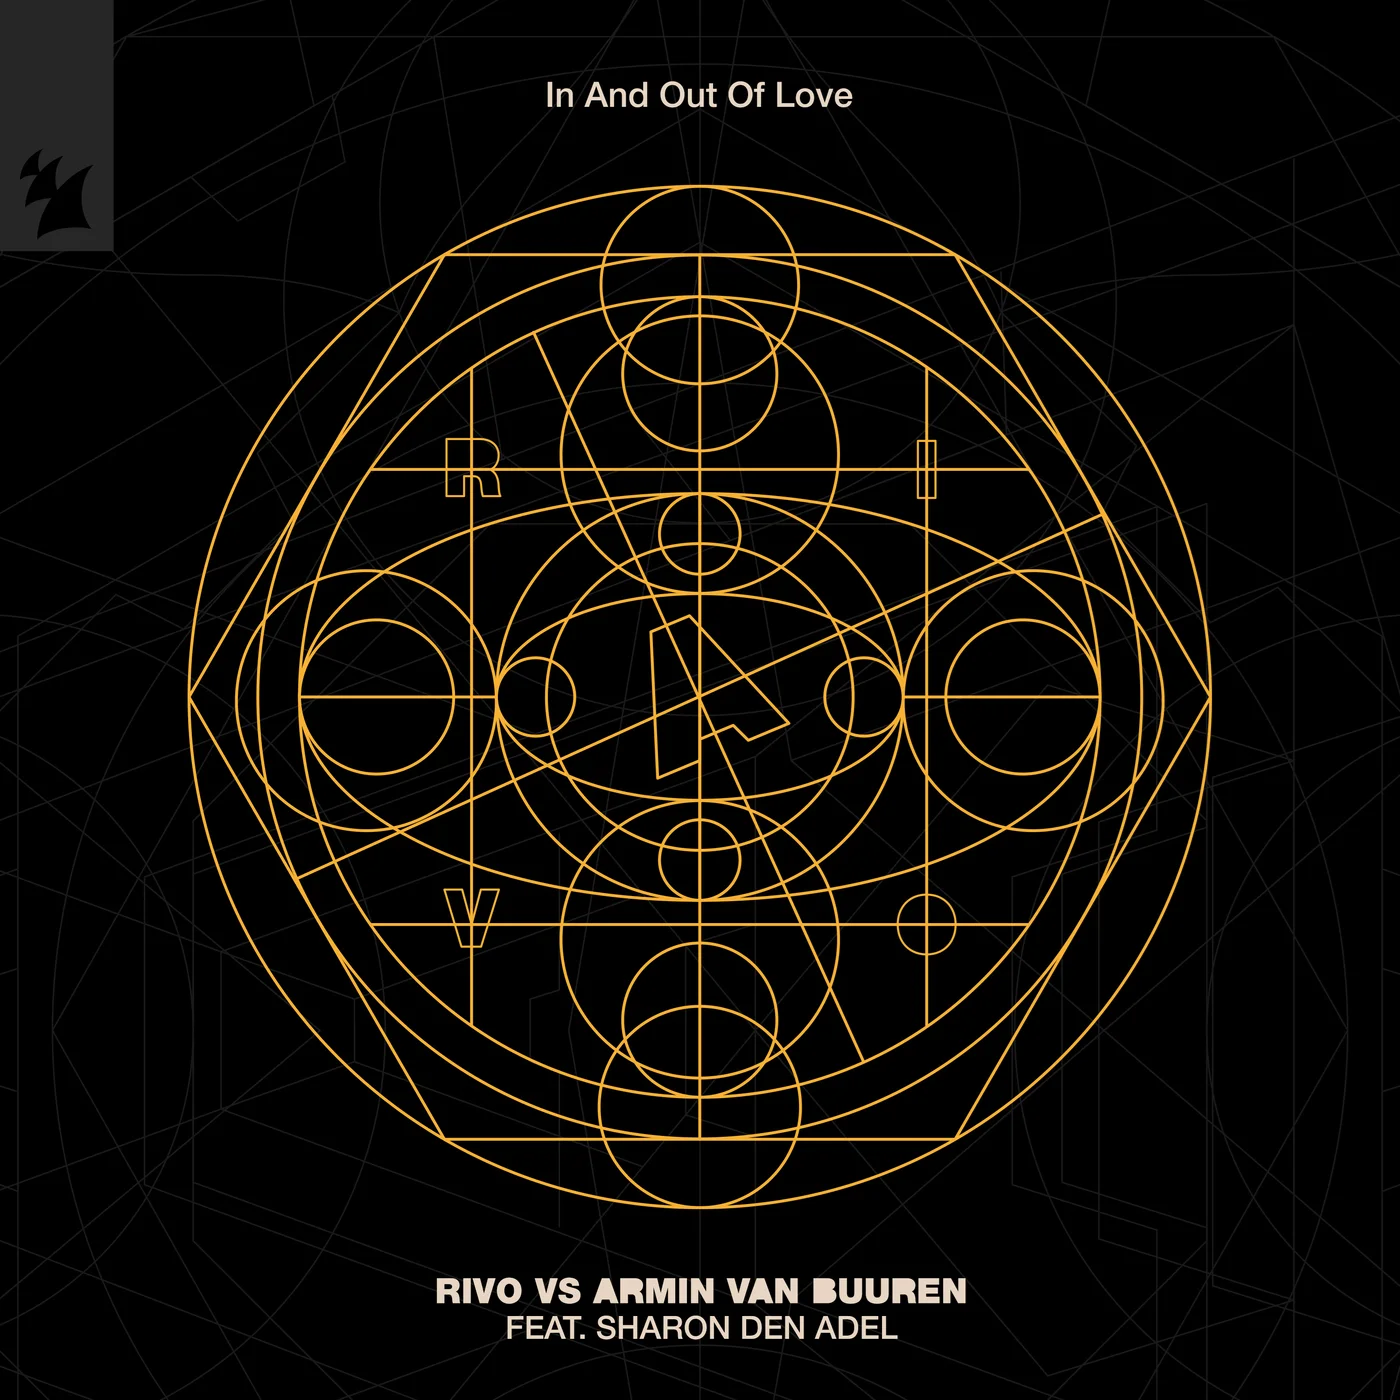 Rivo & Armin van Buuren featuring Sharon den Adel — In And Out Of Love cover artwork